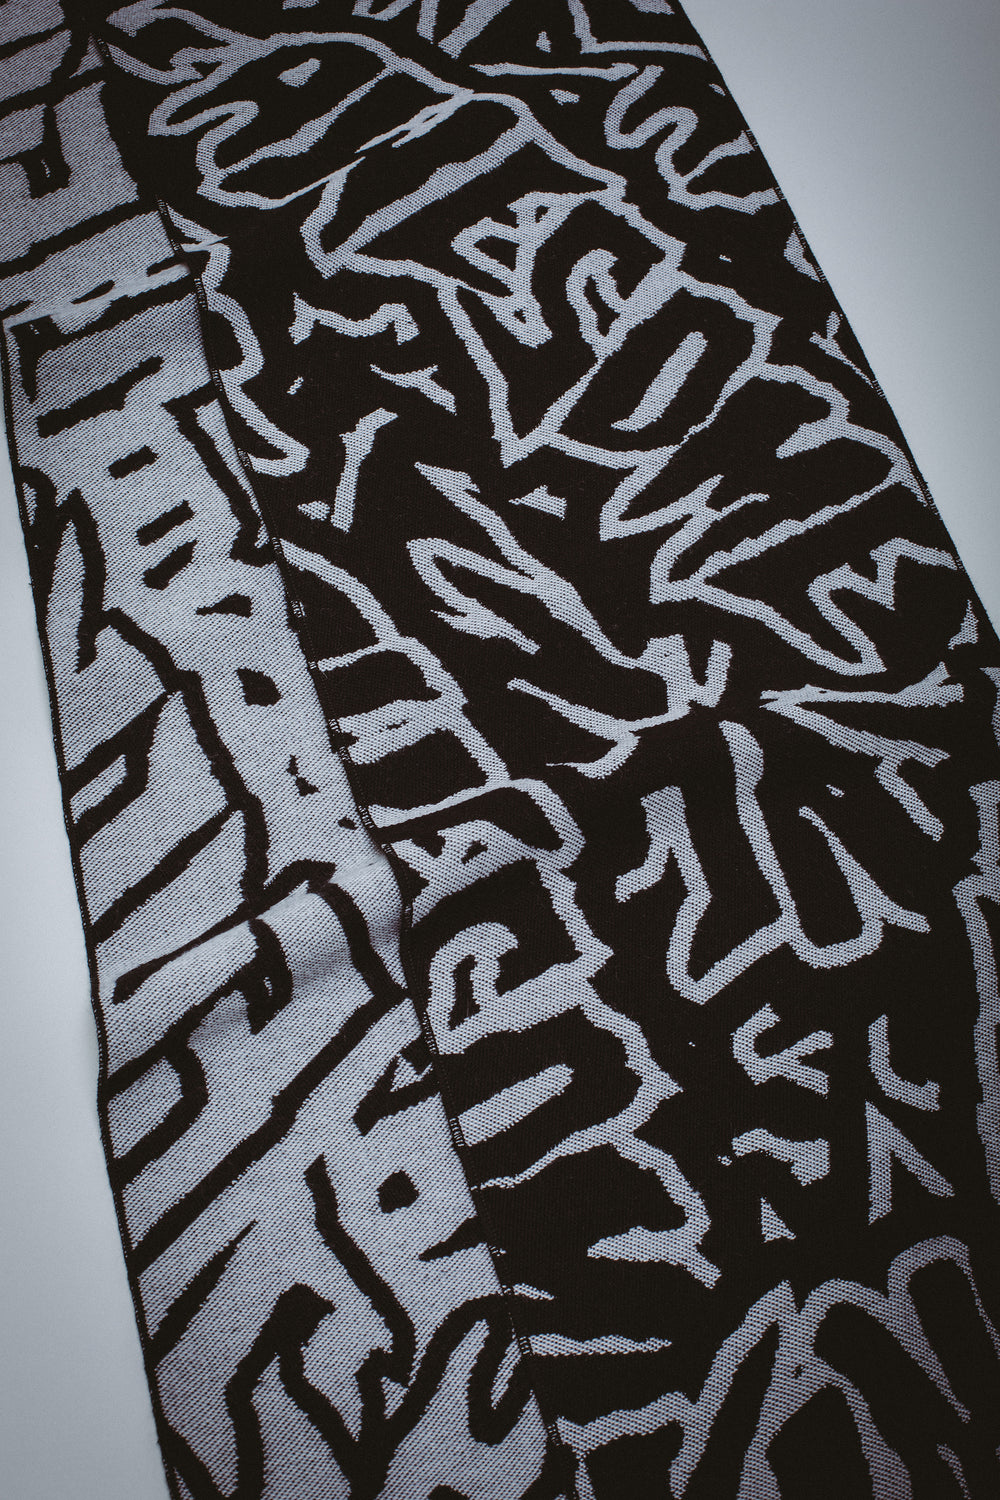 Sticker Stamp Scarf – Fucking Awesome